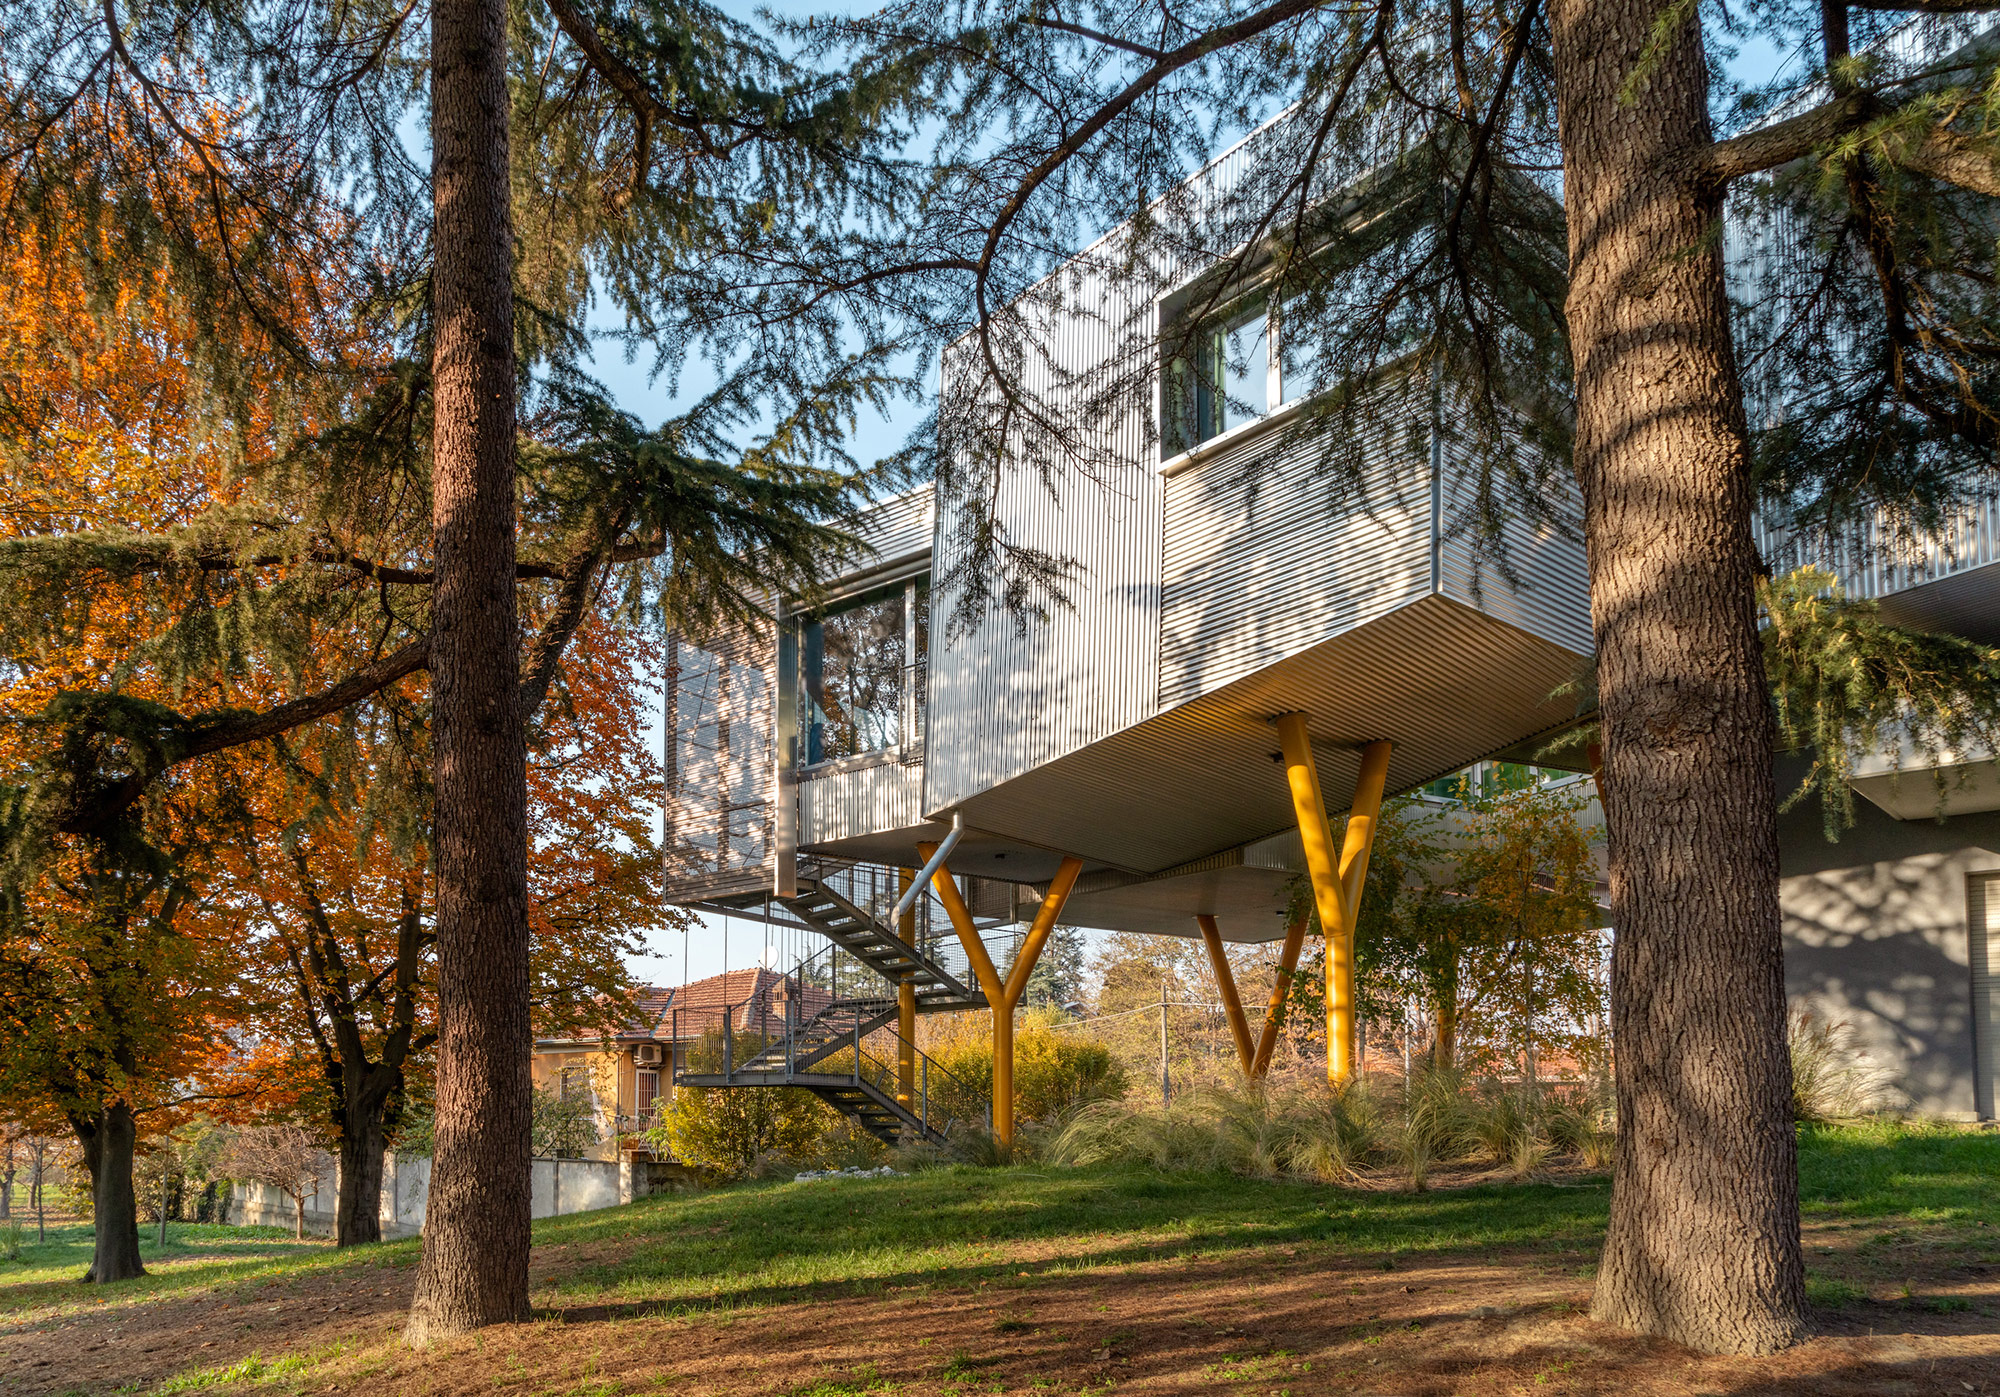 ‘he S-LAB Complex at Turin’The Hole with the House AroundThe S-LAB Complex at Turin’ by ELASTICOFarm: Defying Conventions